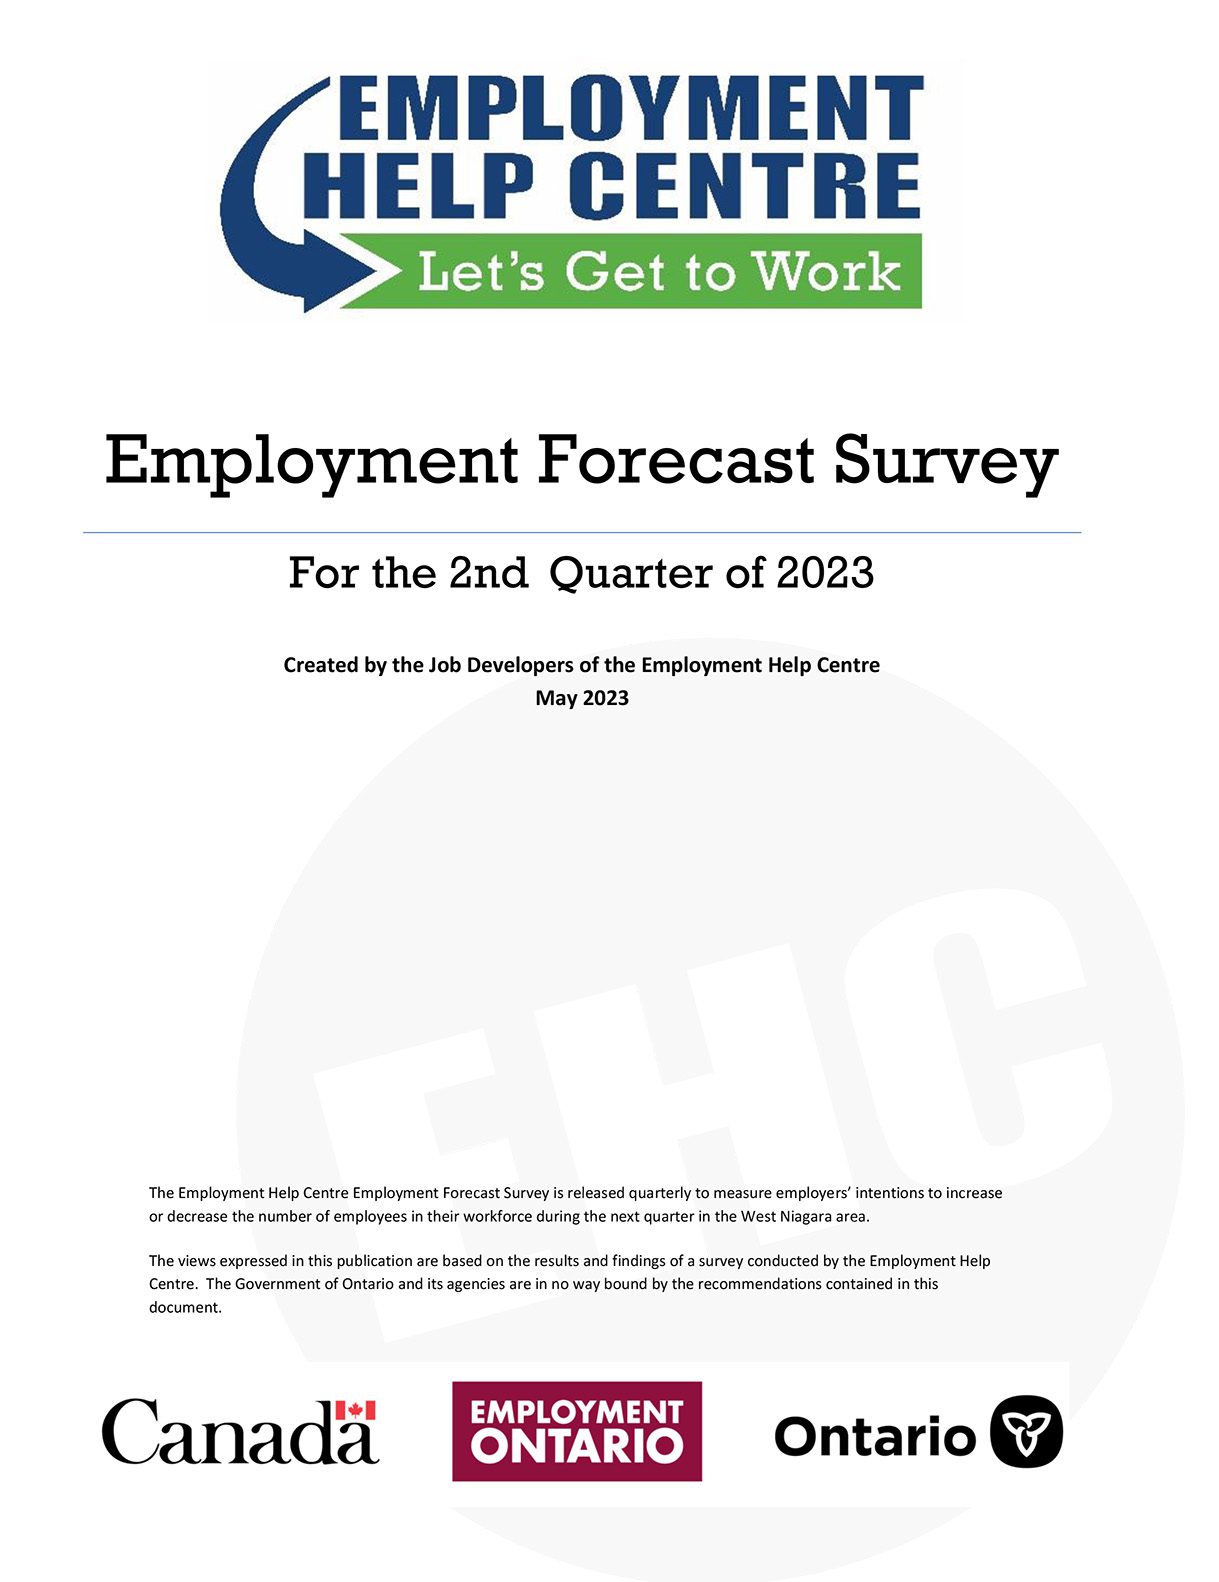 EHC Employment Forecast Survey Results for the 2nd Quarter of 2023